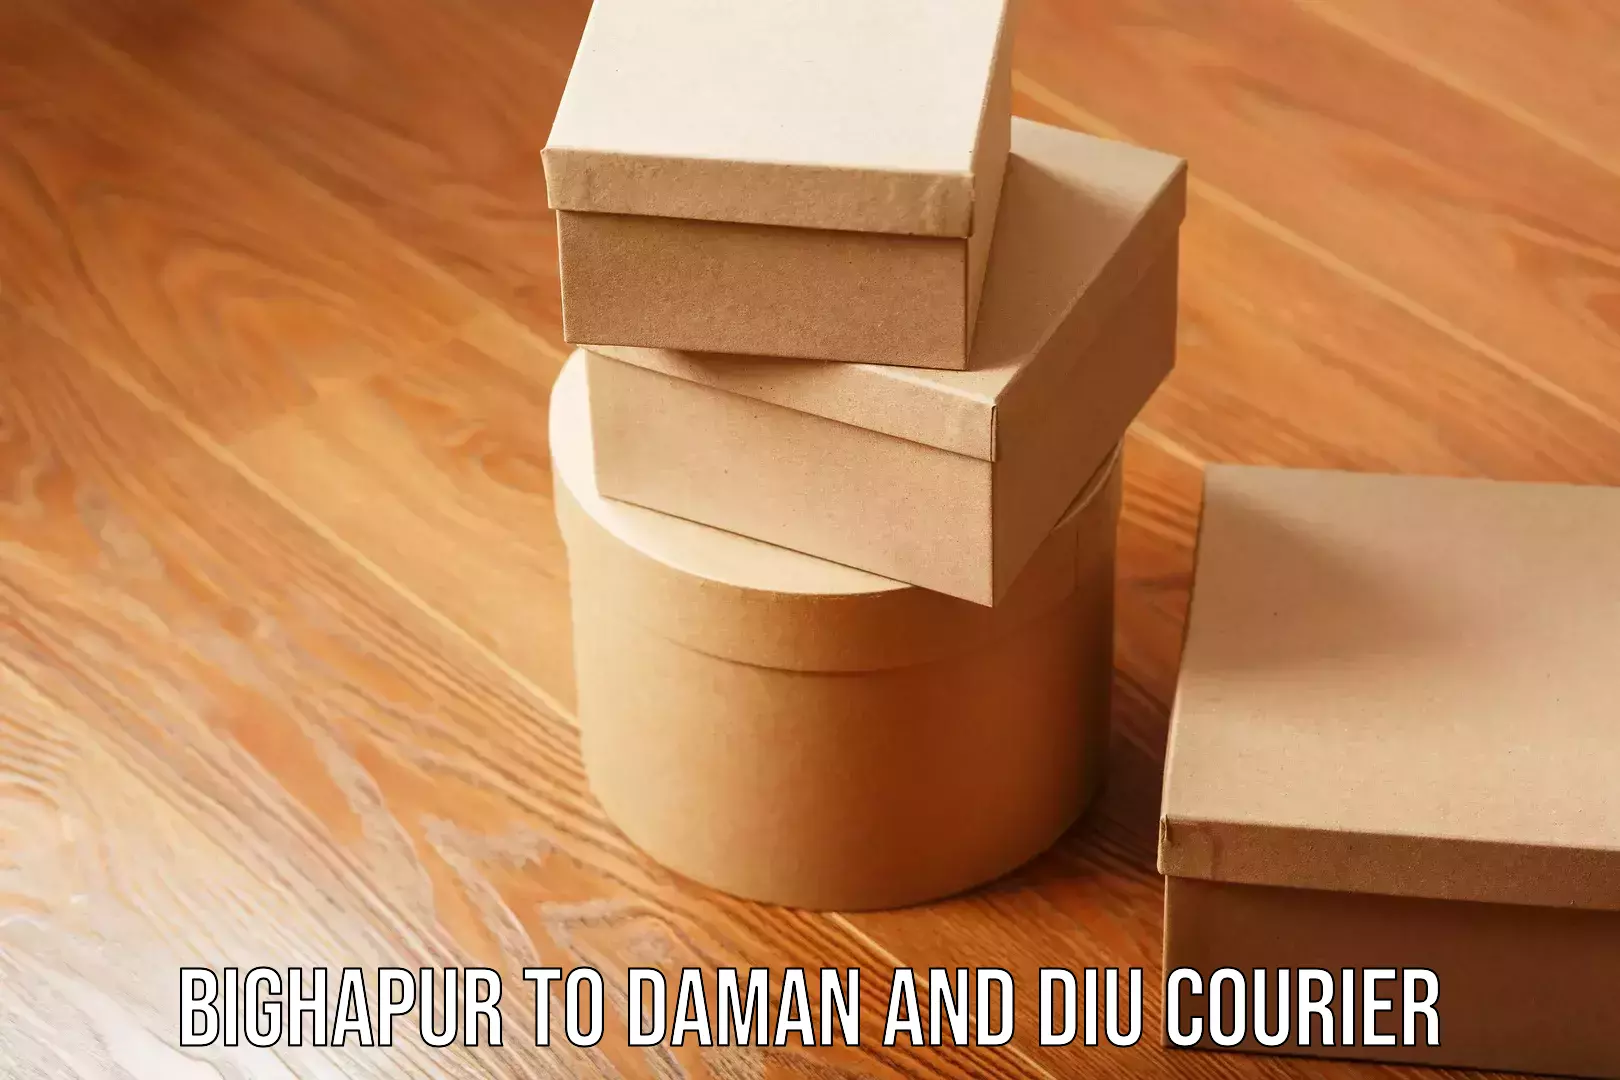 Cargo delivery service Bighapur to Daman and Diu